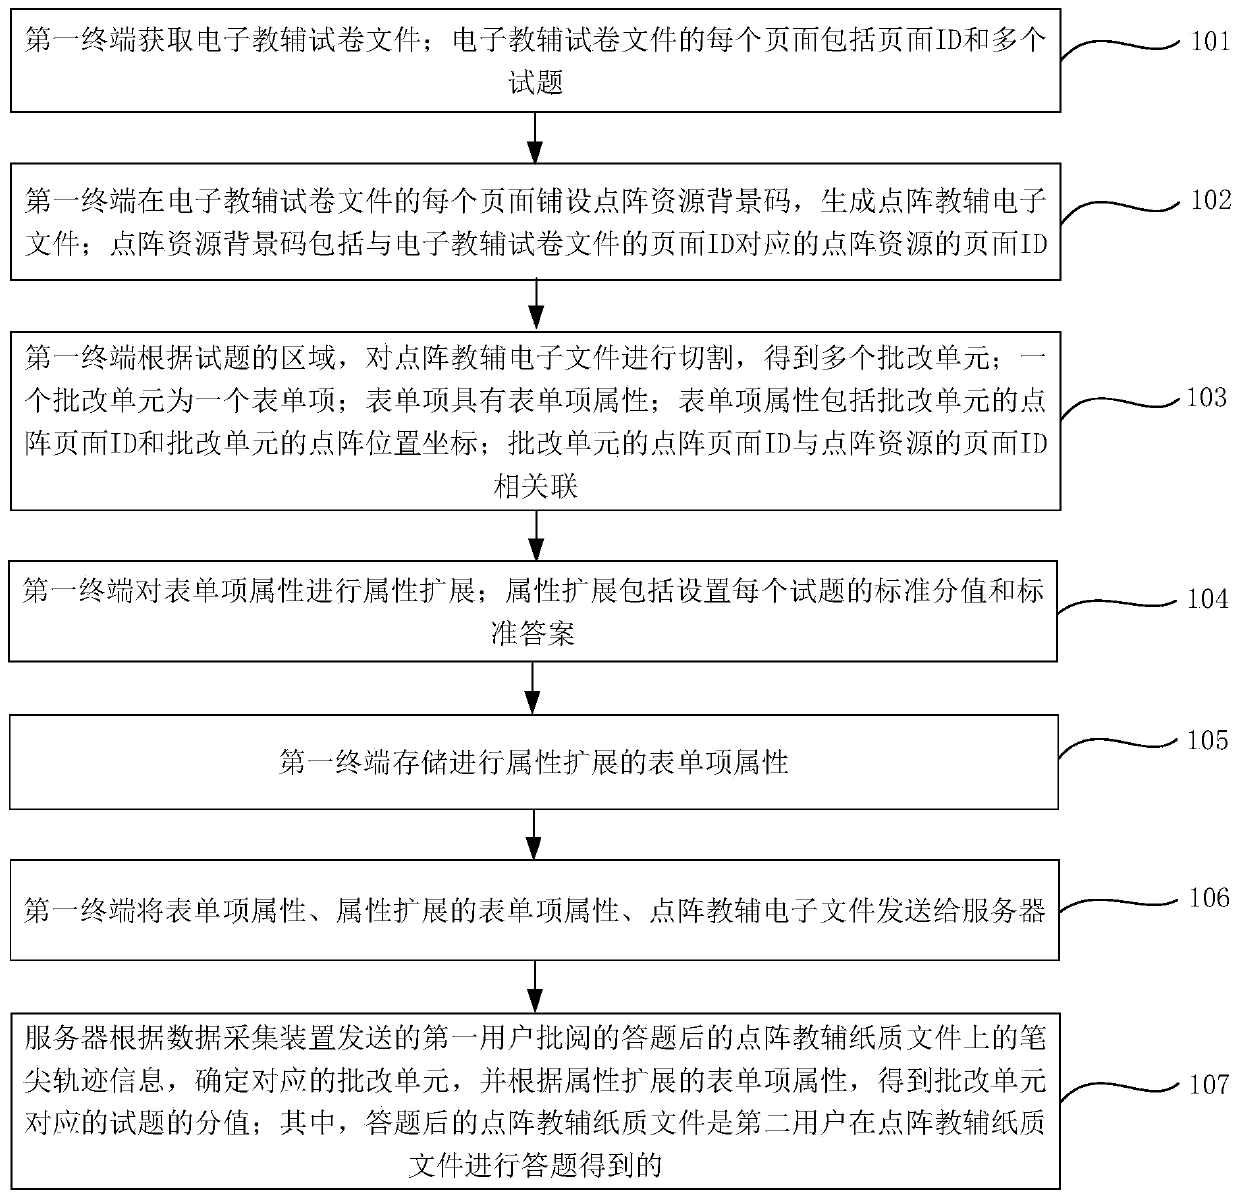 Digital paper marking method and system based on paper and pen improvement